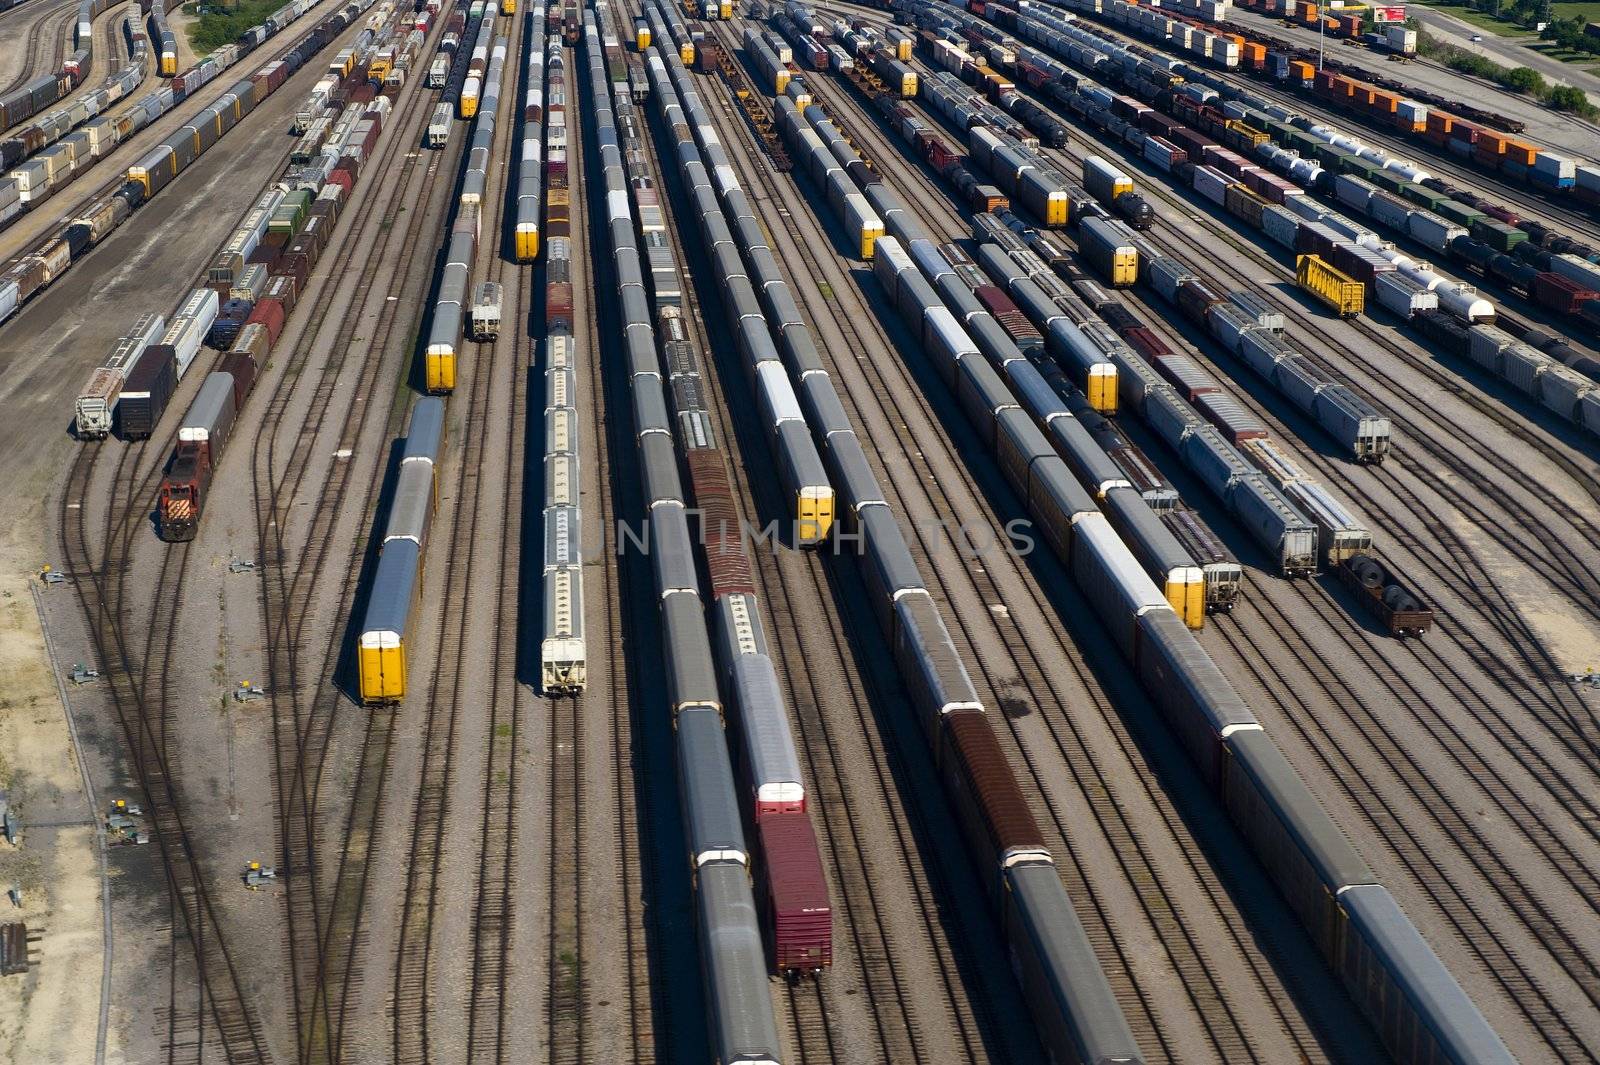 Image of an aerial view of many train cars on tracks